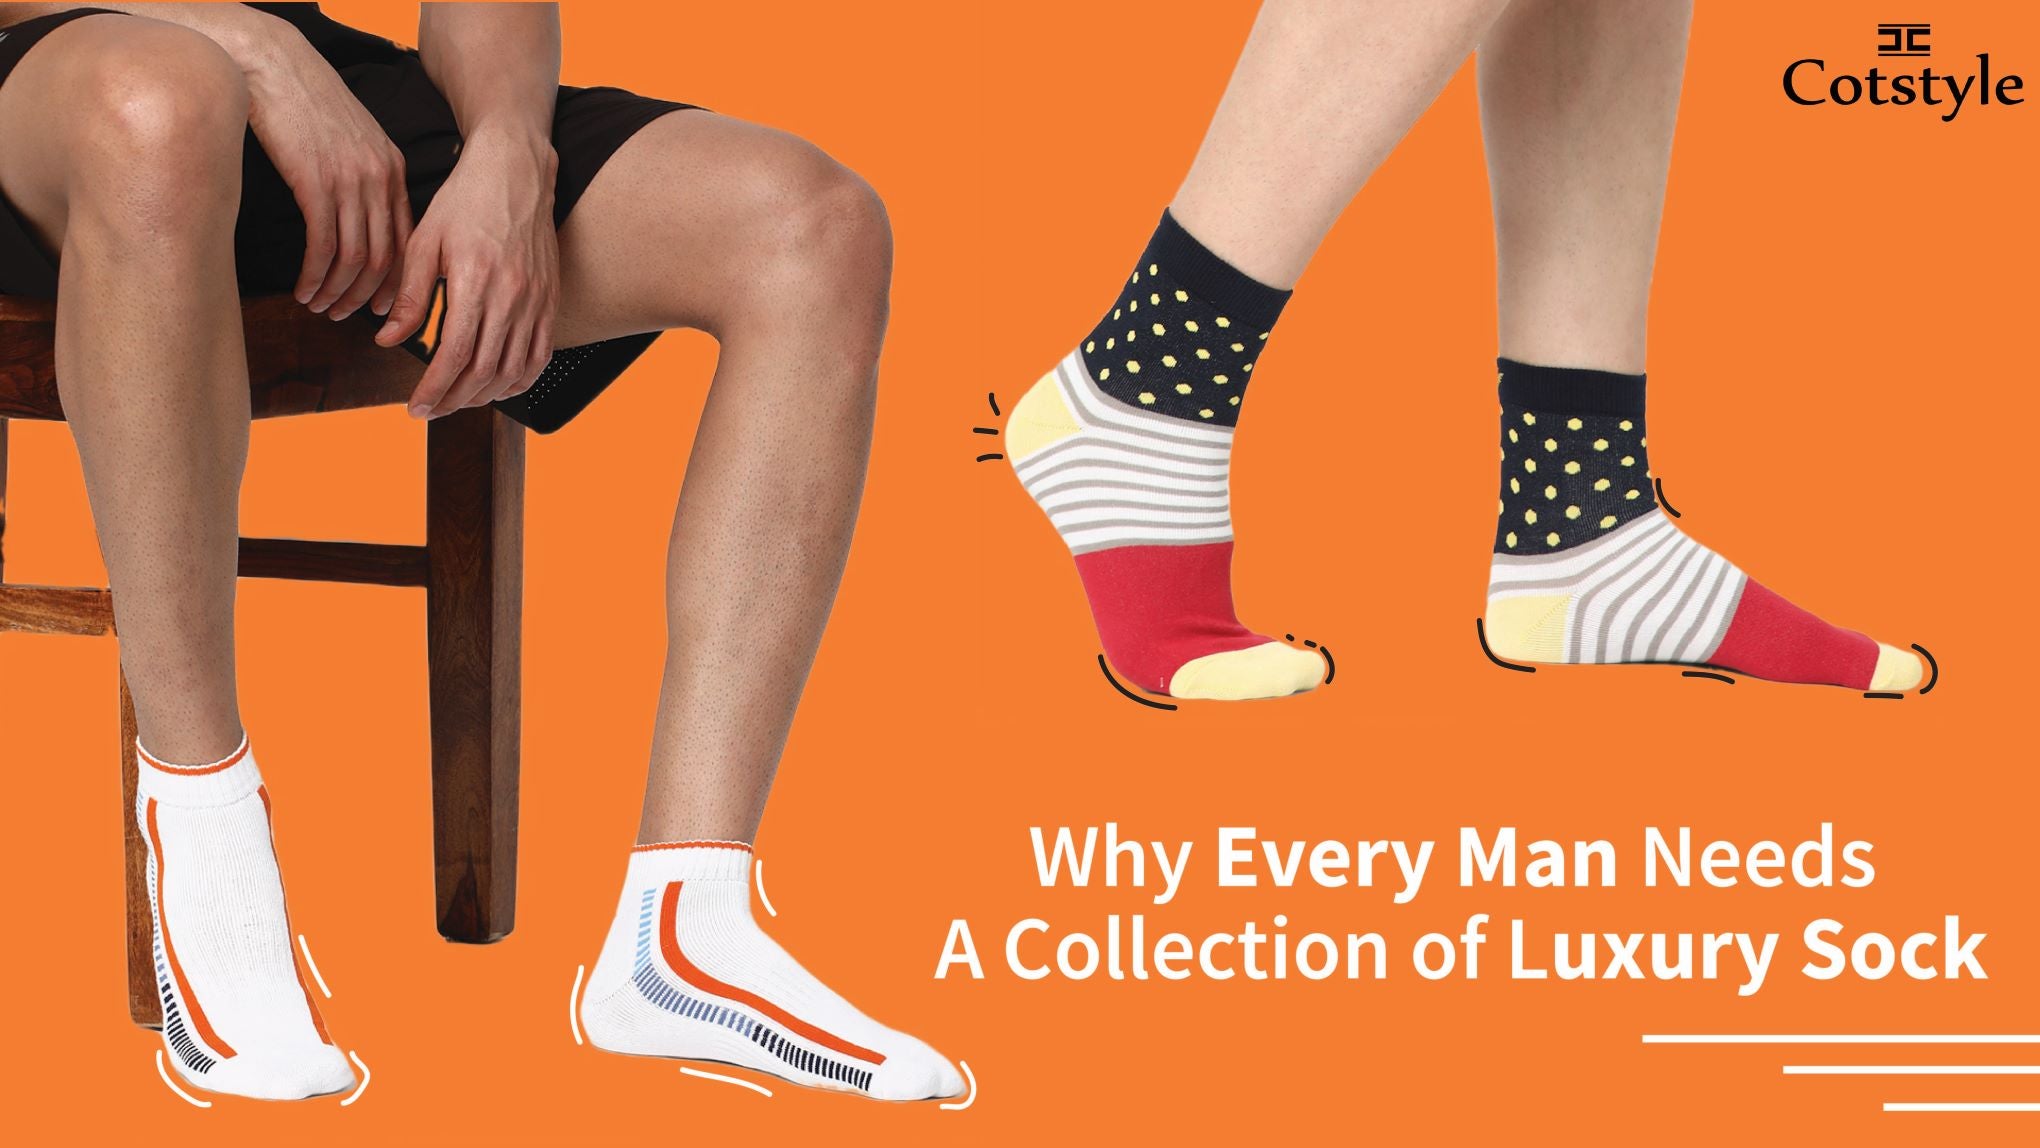 Why Every Man Needs a Collection of Luxury Socks